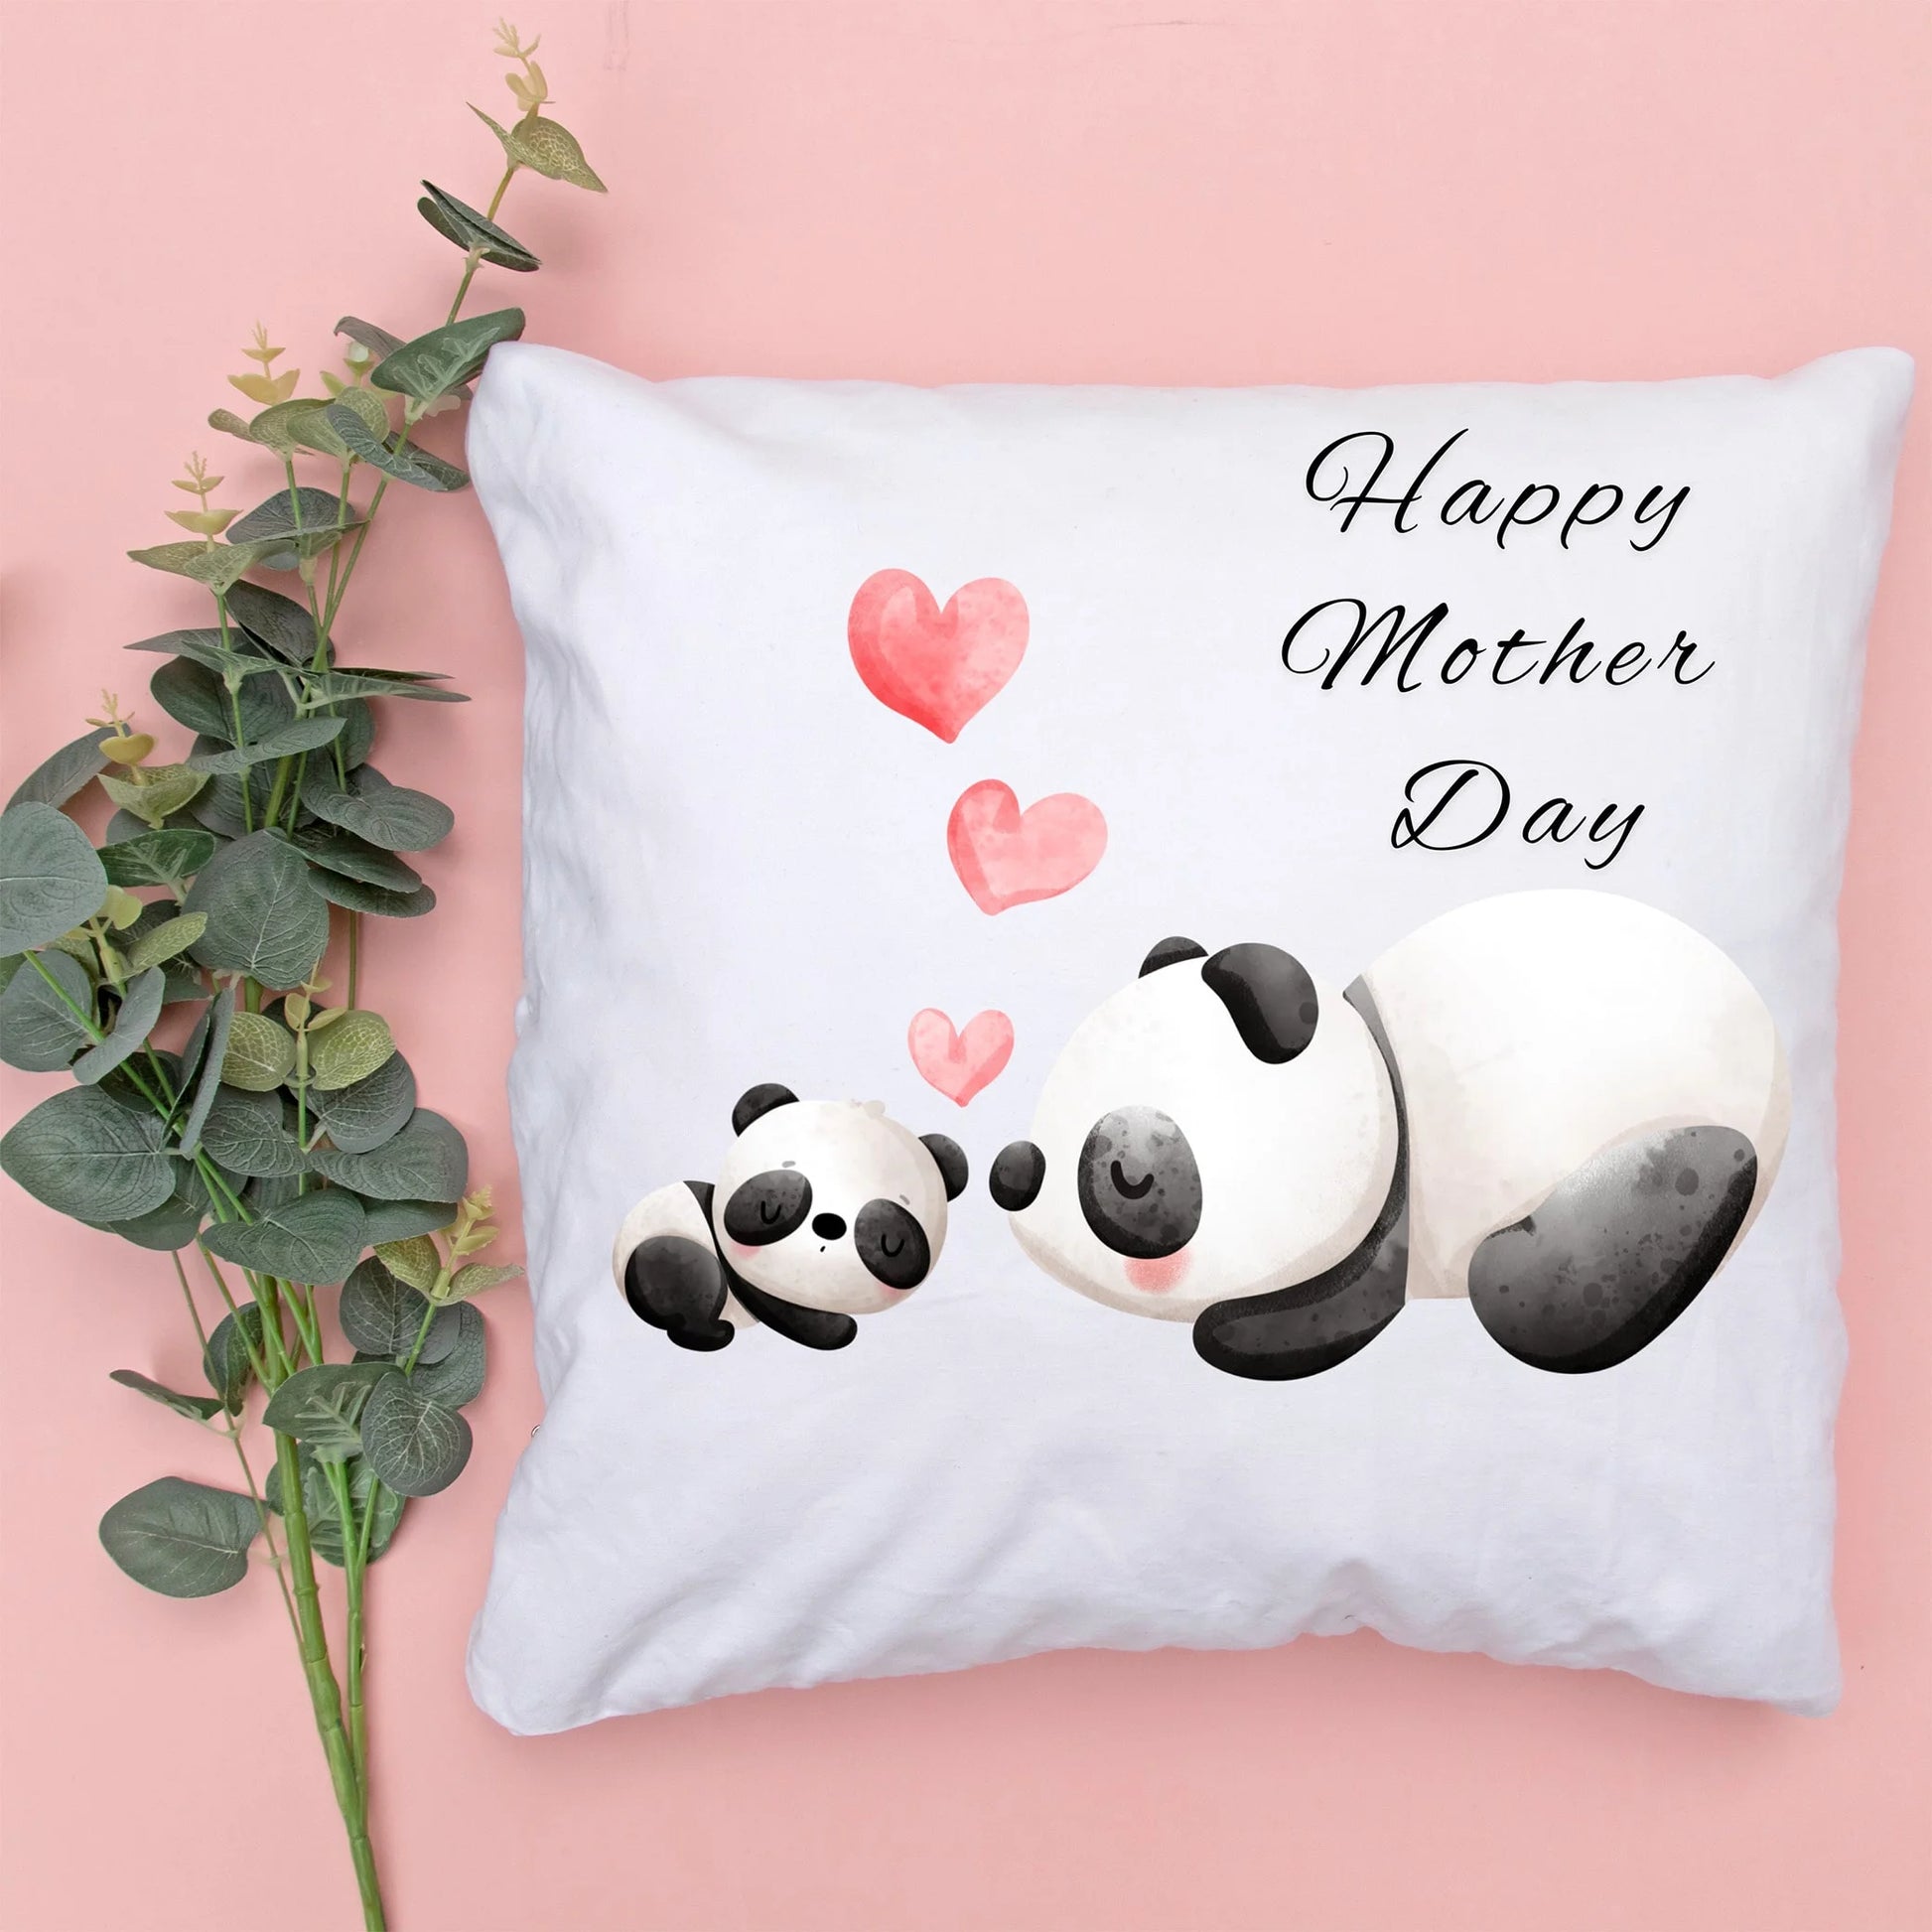 Cushion Gift for Mothers Day